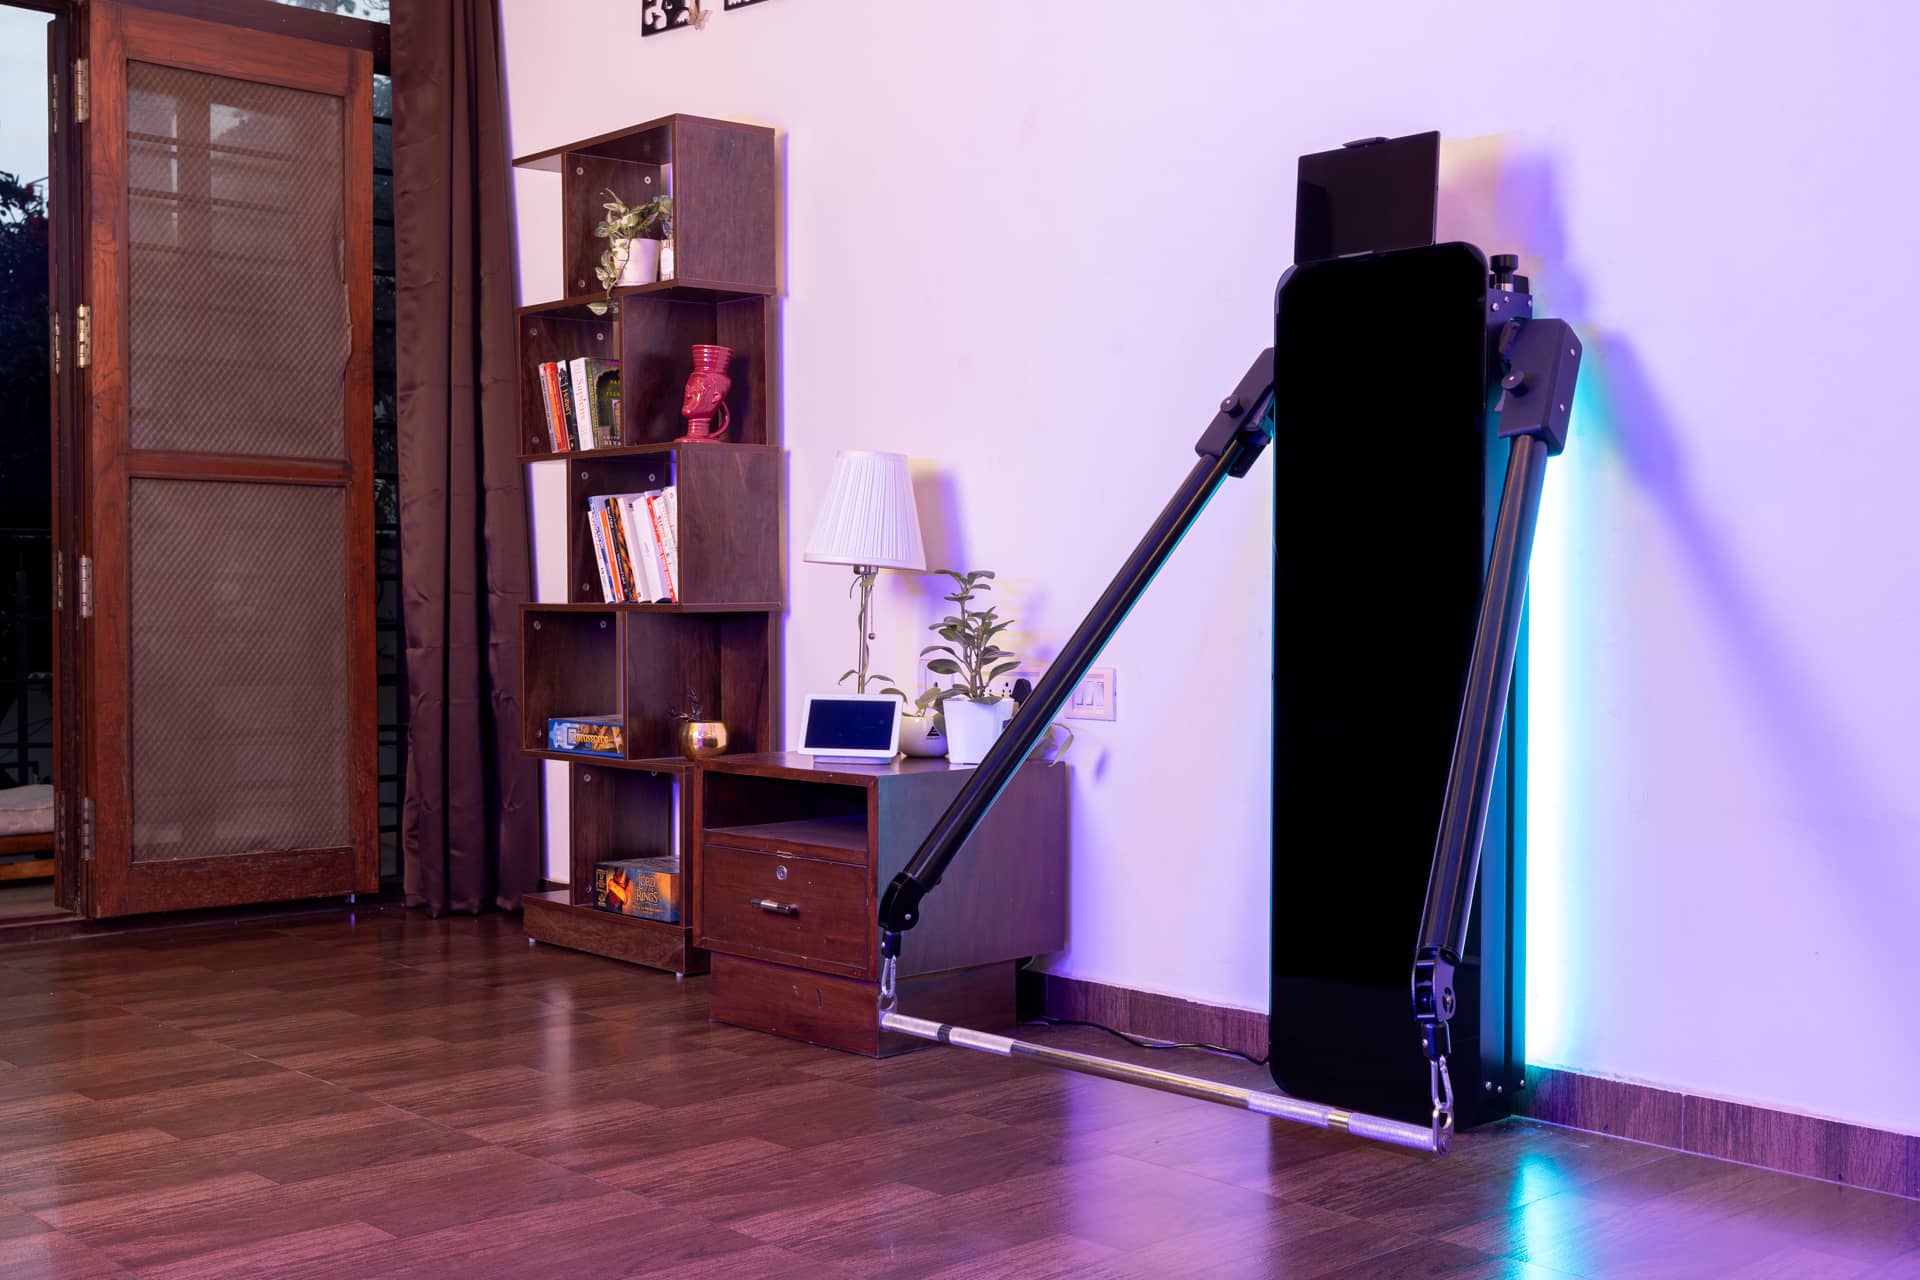 The device takes up 4 feet x 2 feet space, which is equivalent to a vertically wall-mounted 55 inch LED TV.
